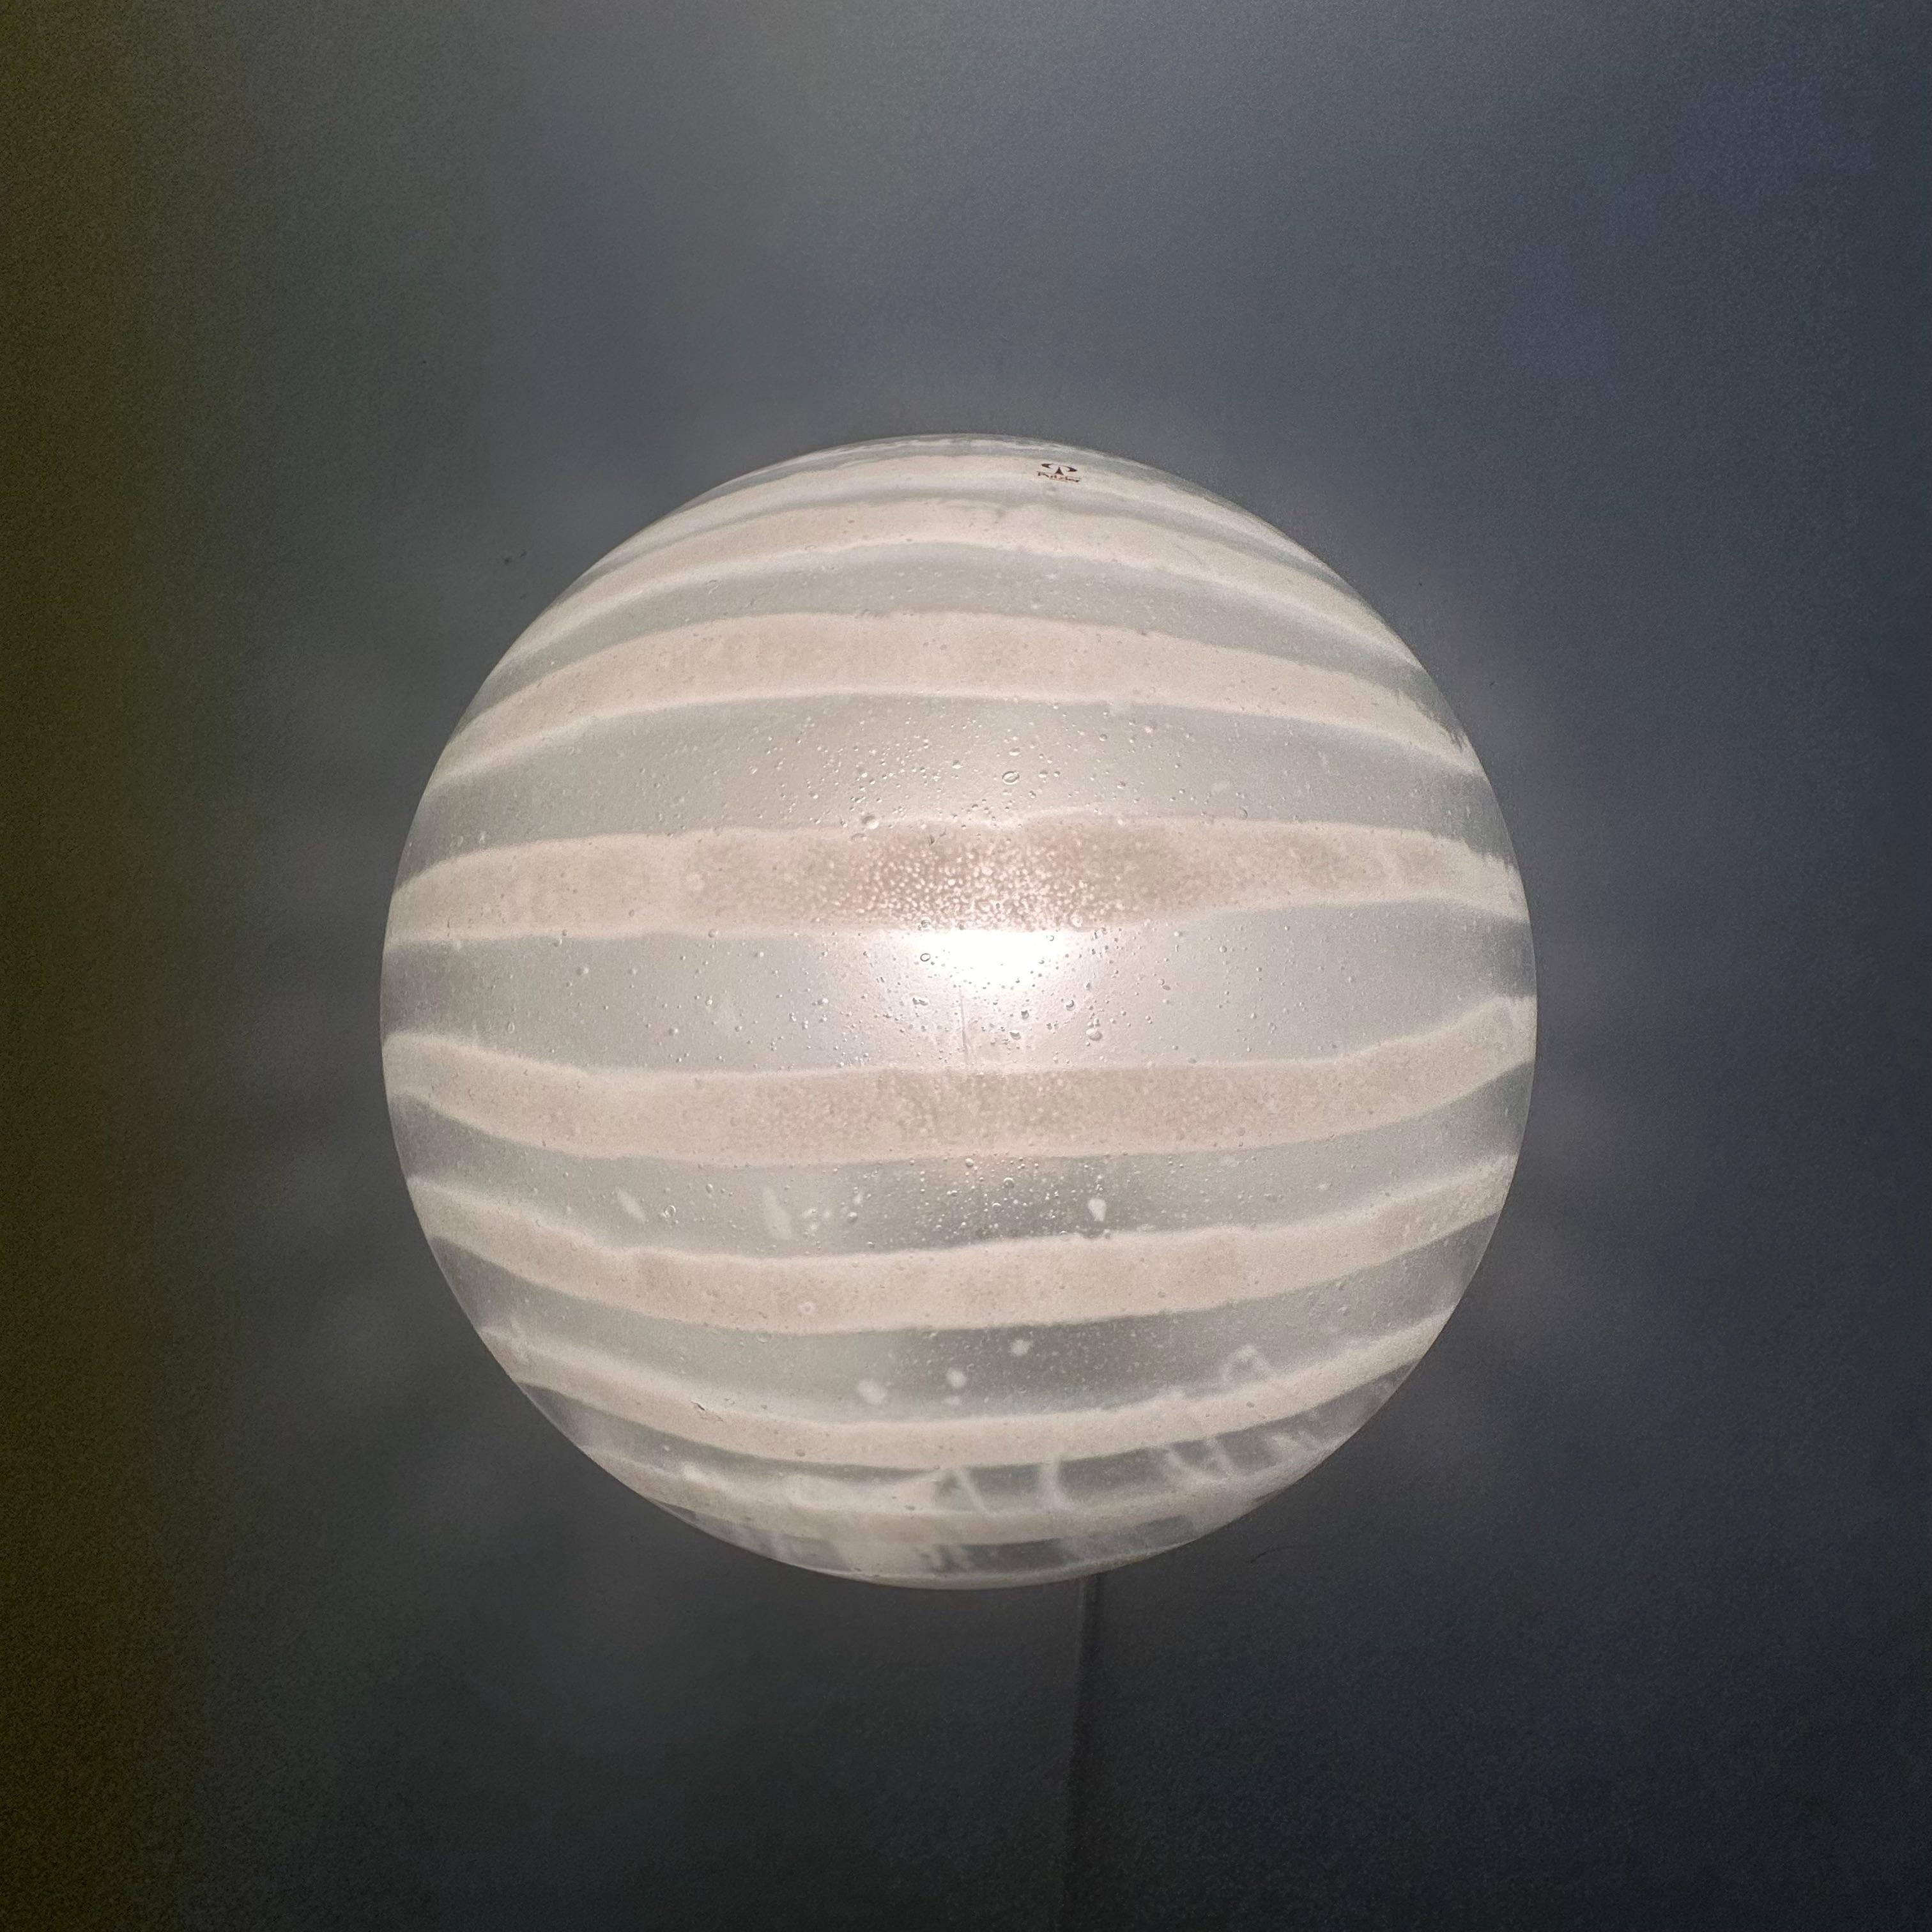 Peil & Putzler glass flush mount / wall lamp ‘zebra’ , 1970s Germany
Dimensions: 28cm Diameter, 13 cm Height
Condition: New in box
Period: 1970’s
Material: Glass , metal